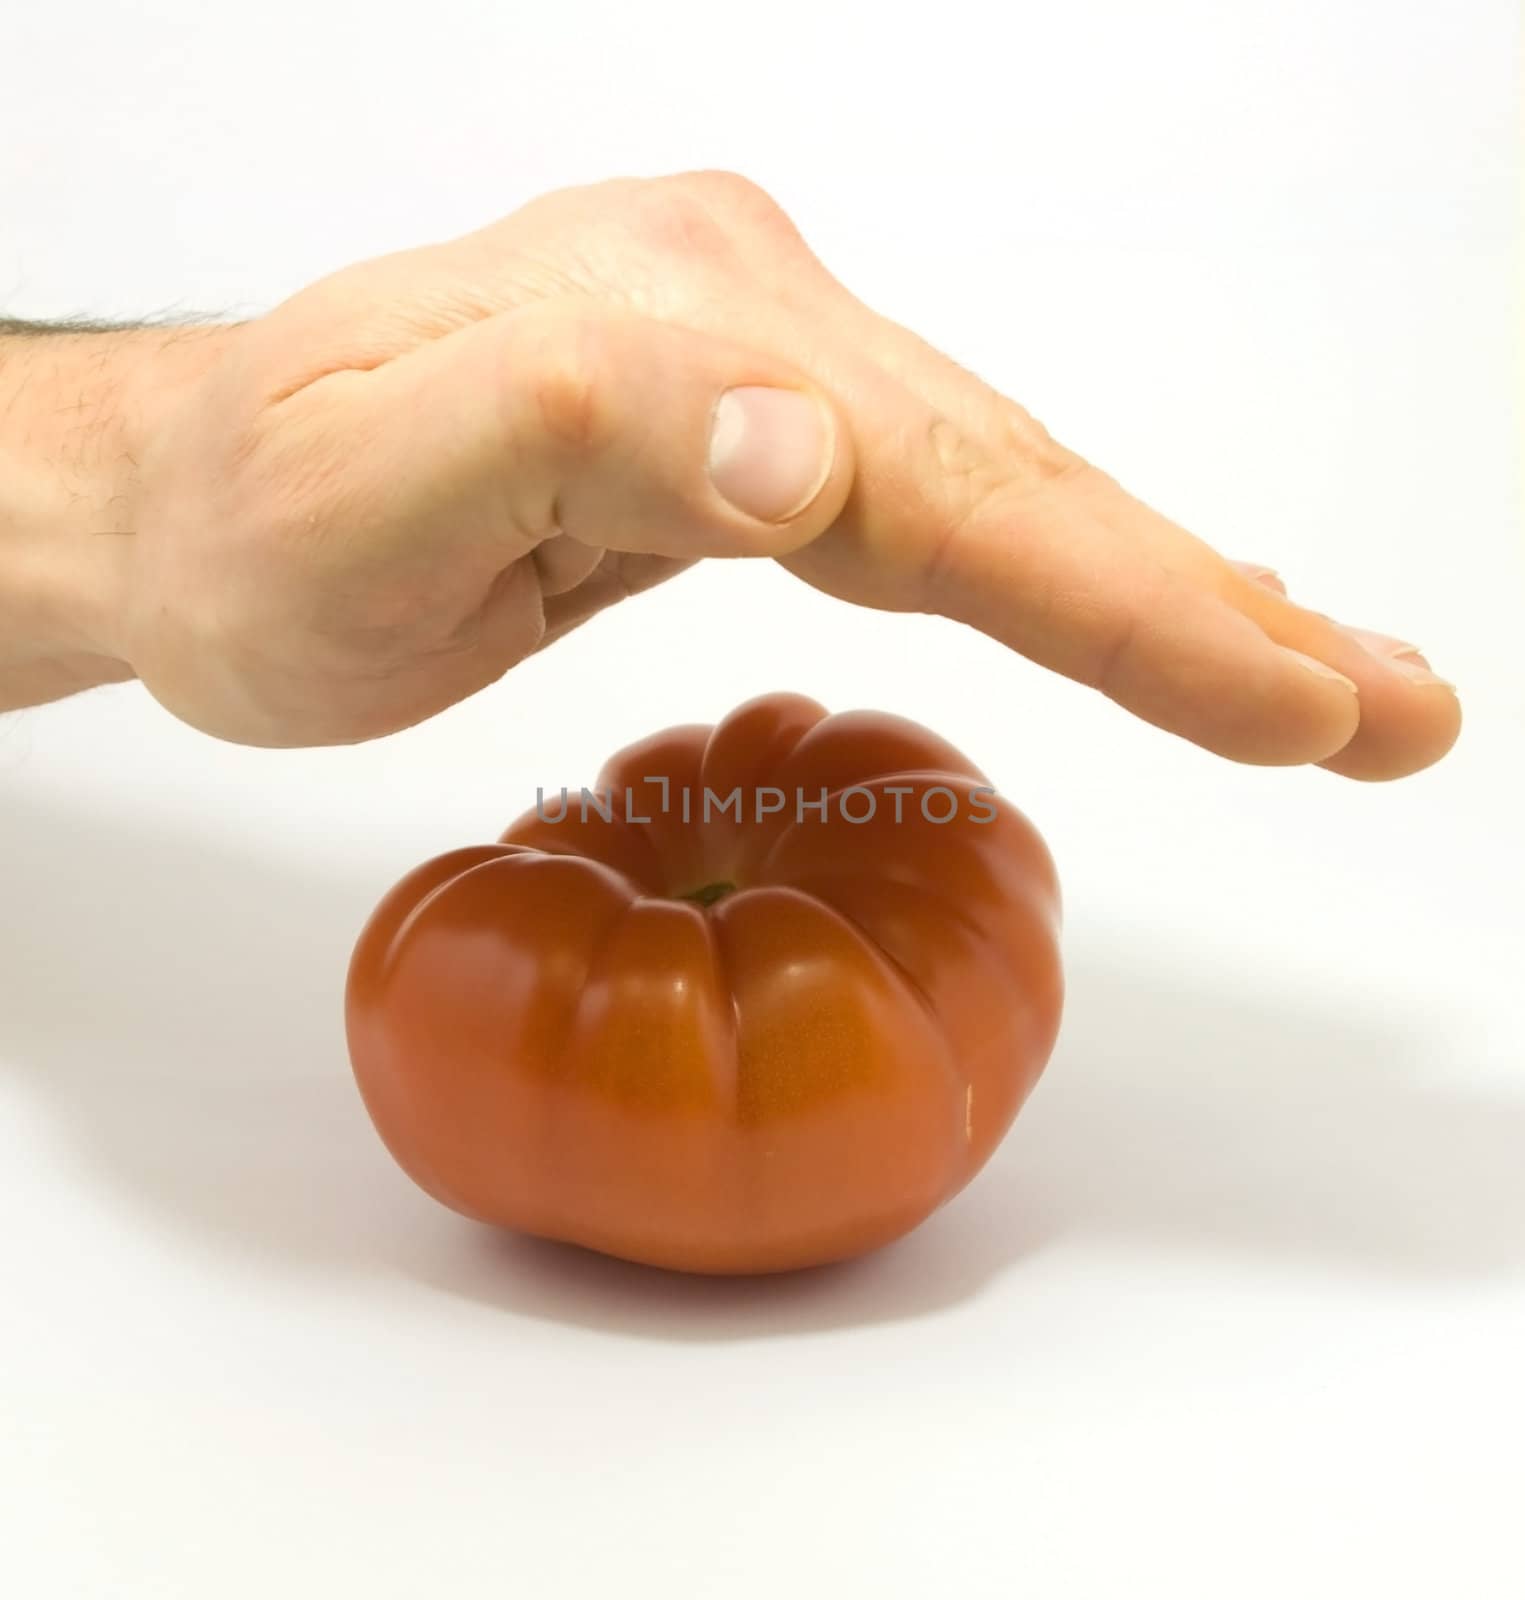 Human hand and tomato isolated on white